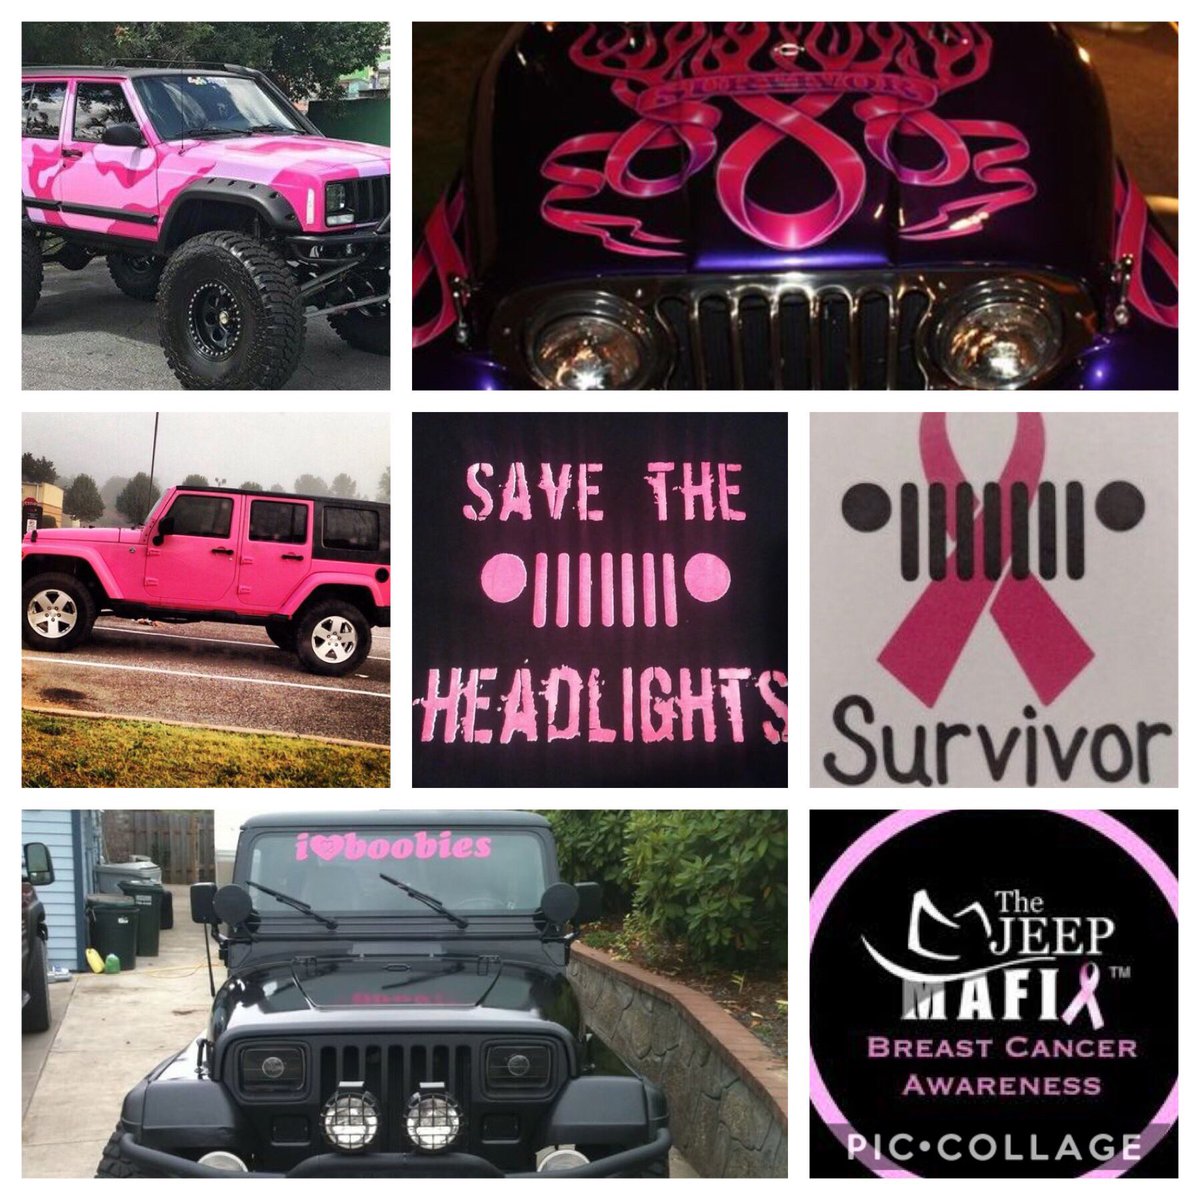 GM Jeep Mafia 👋 It’s #NationalWomensCheckupDay  Ladies we need to make our appointments to stay healthy so we can do more wheeling and muddin’ 
#CheckYourRack